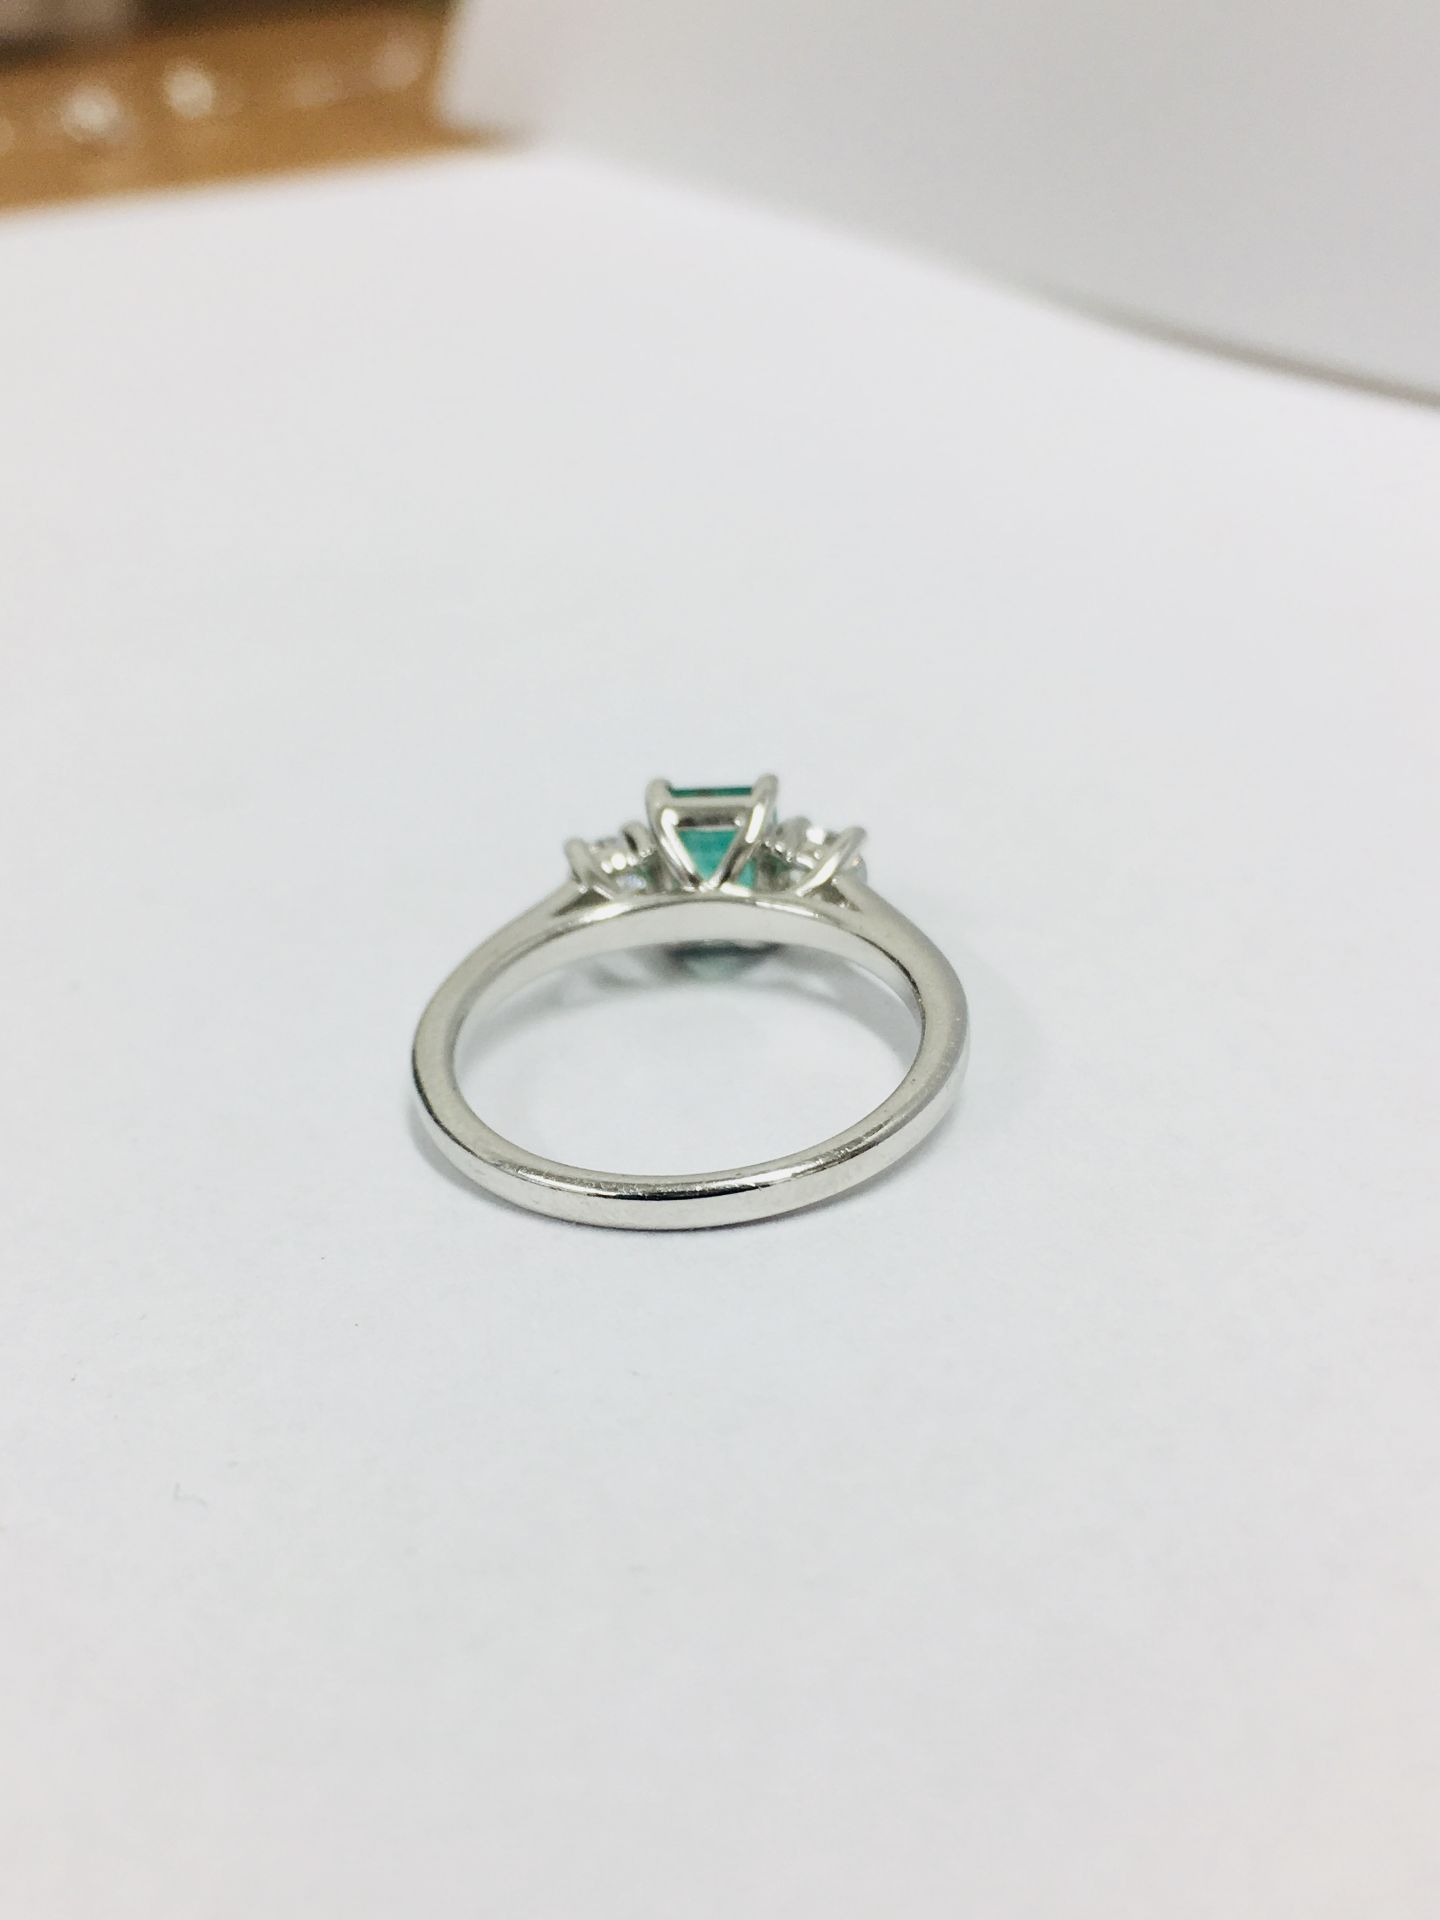 Emerald and diamond trilogy style ring. Rectangular cut emerald ( treated ) 0.70ct with a - Image 4 of 5